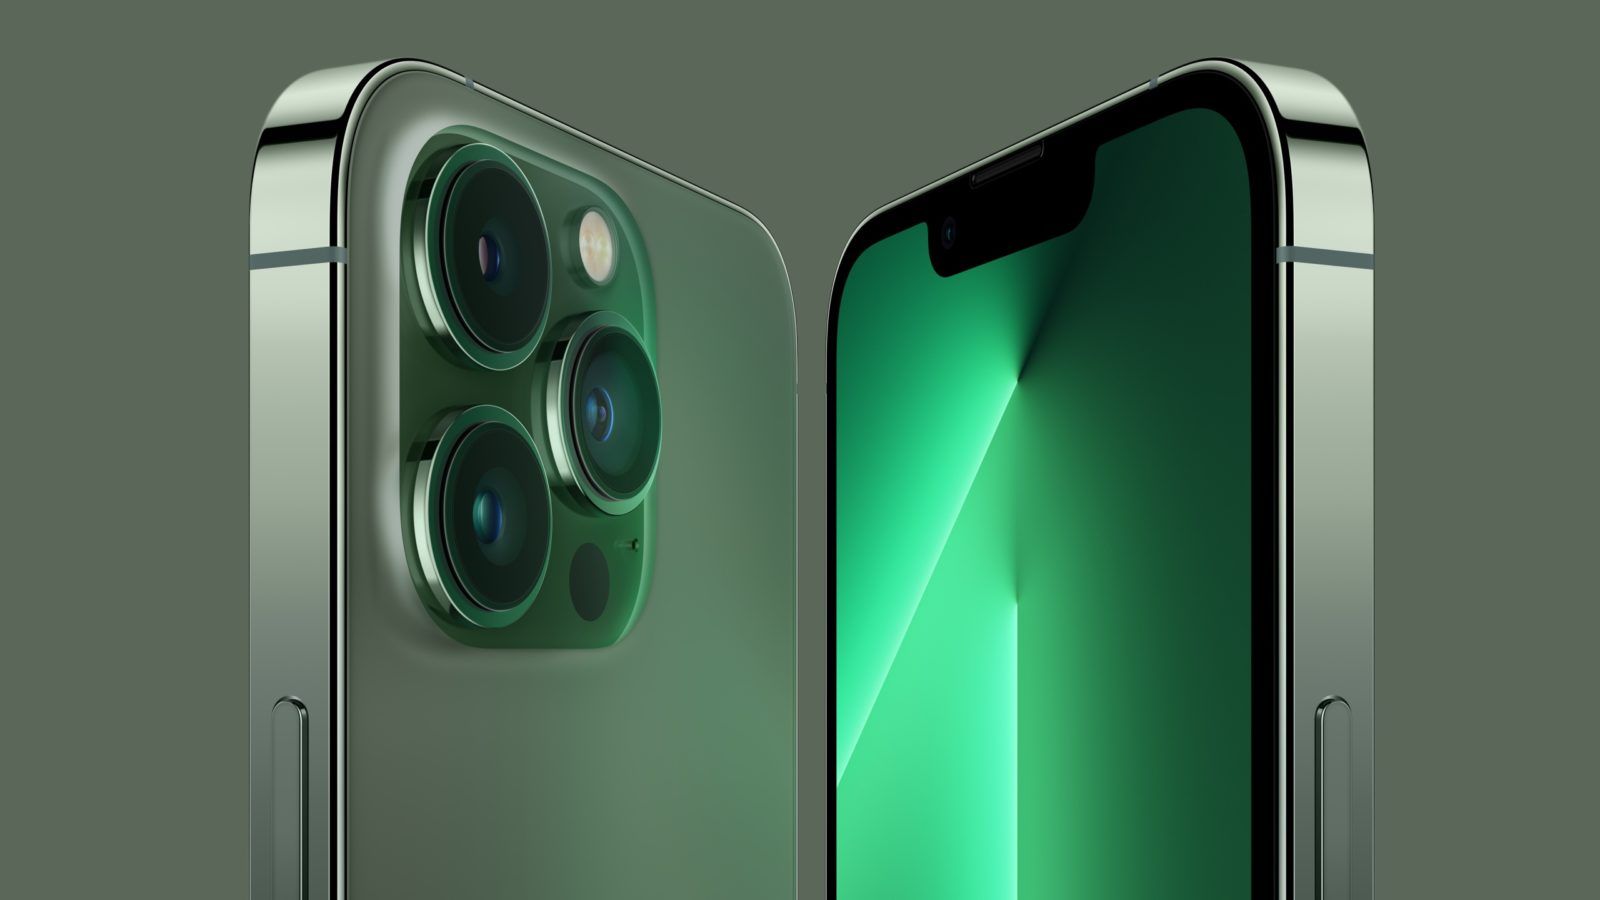 What’s new at Apple? iPhone 13 in Alpine Green, iPad Air, Mac Studio and more